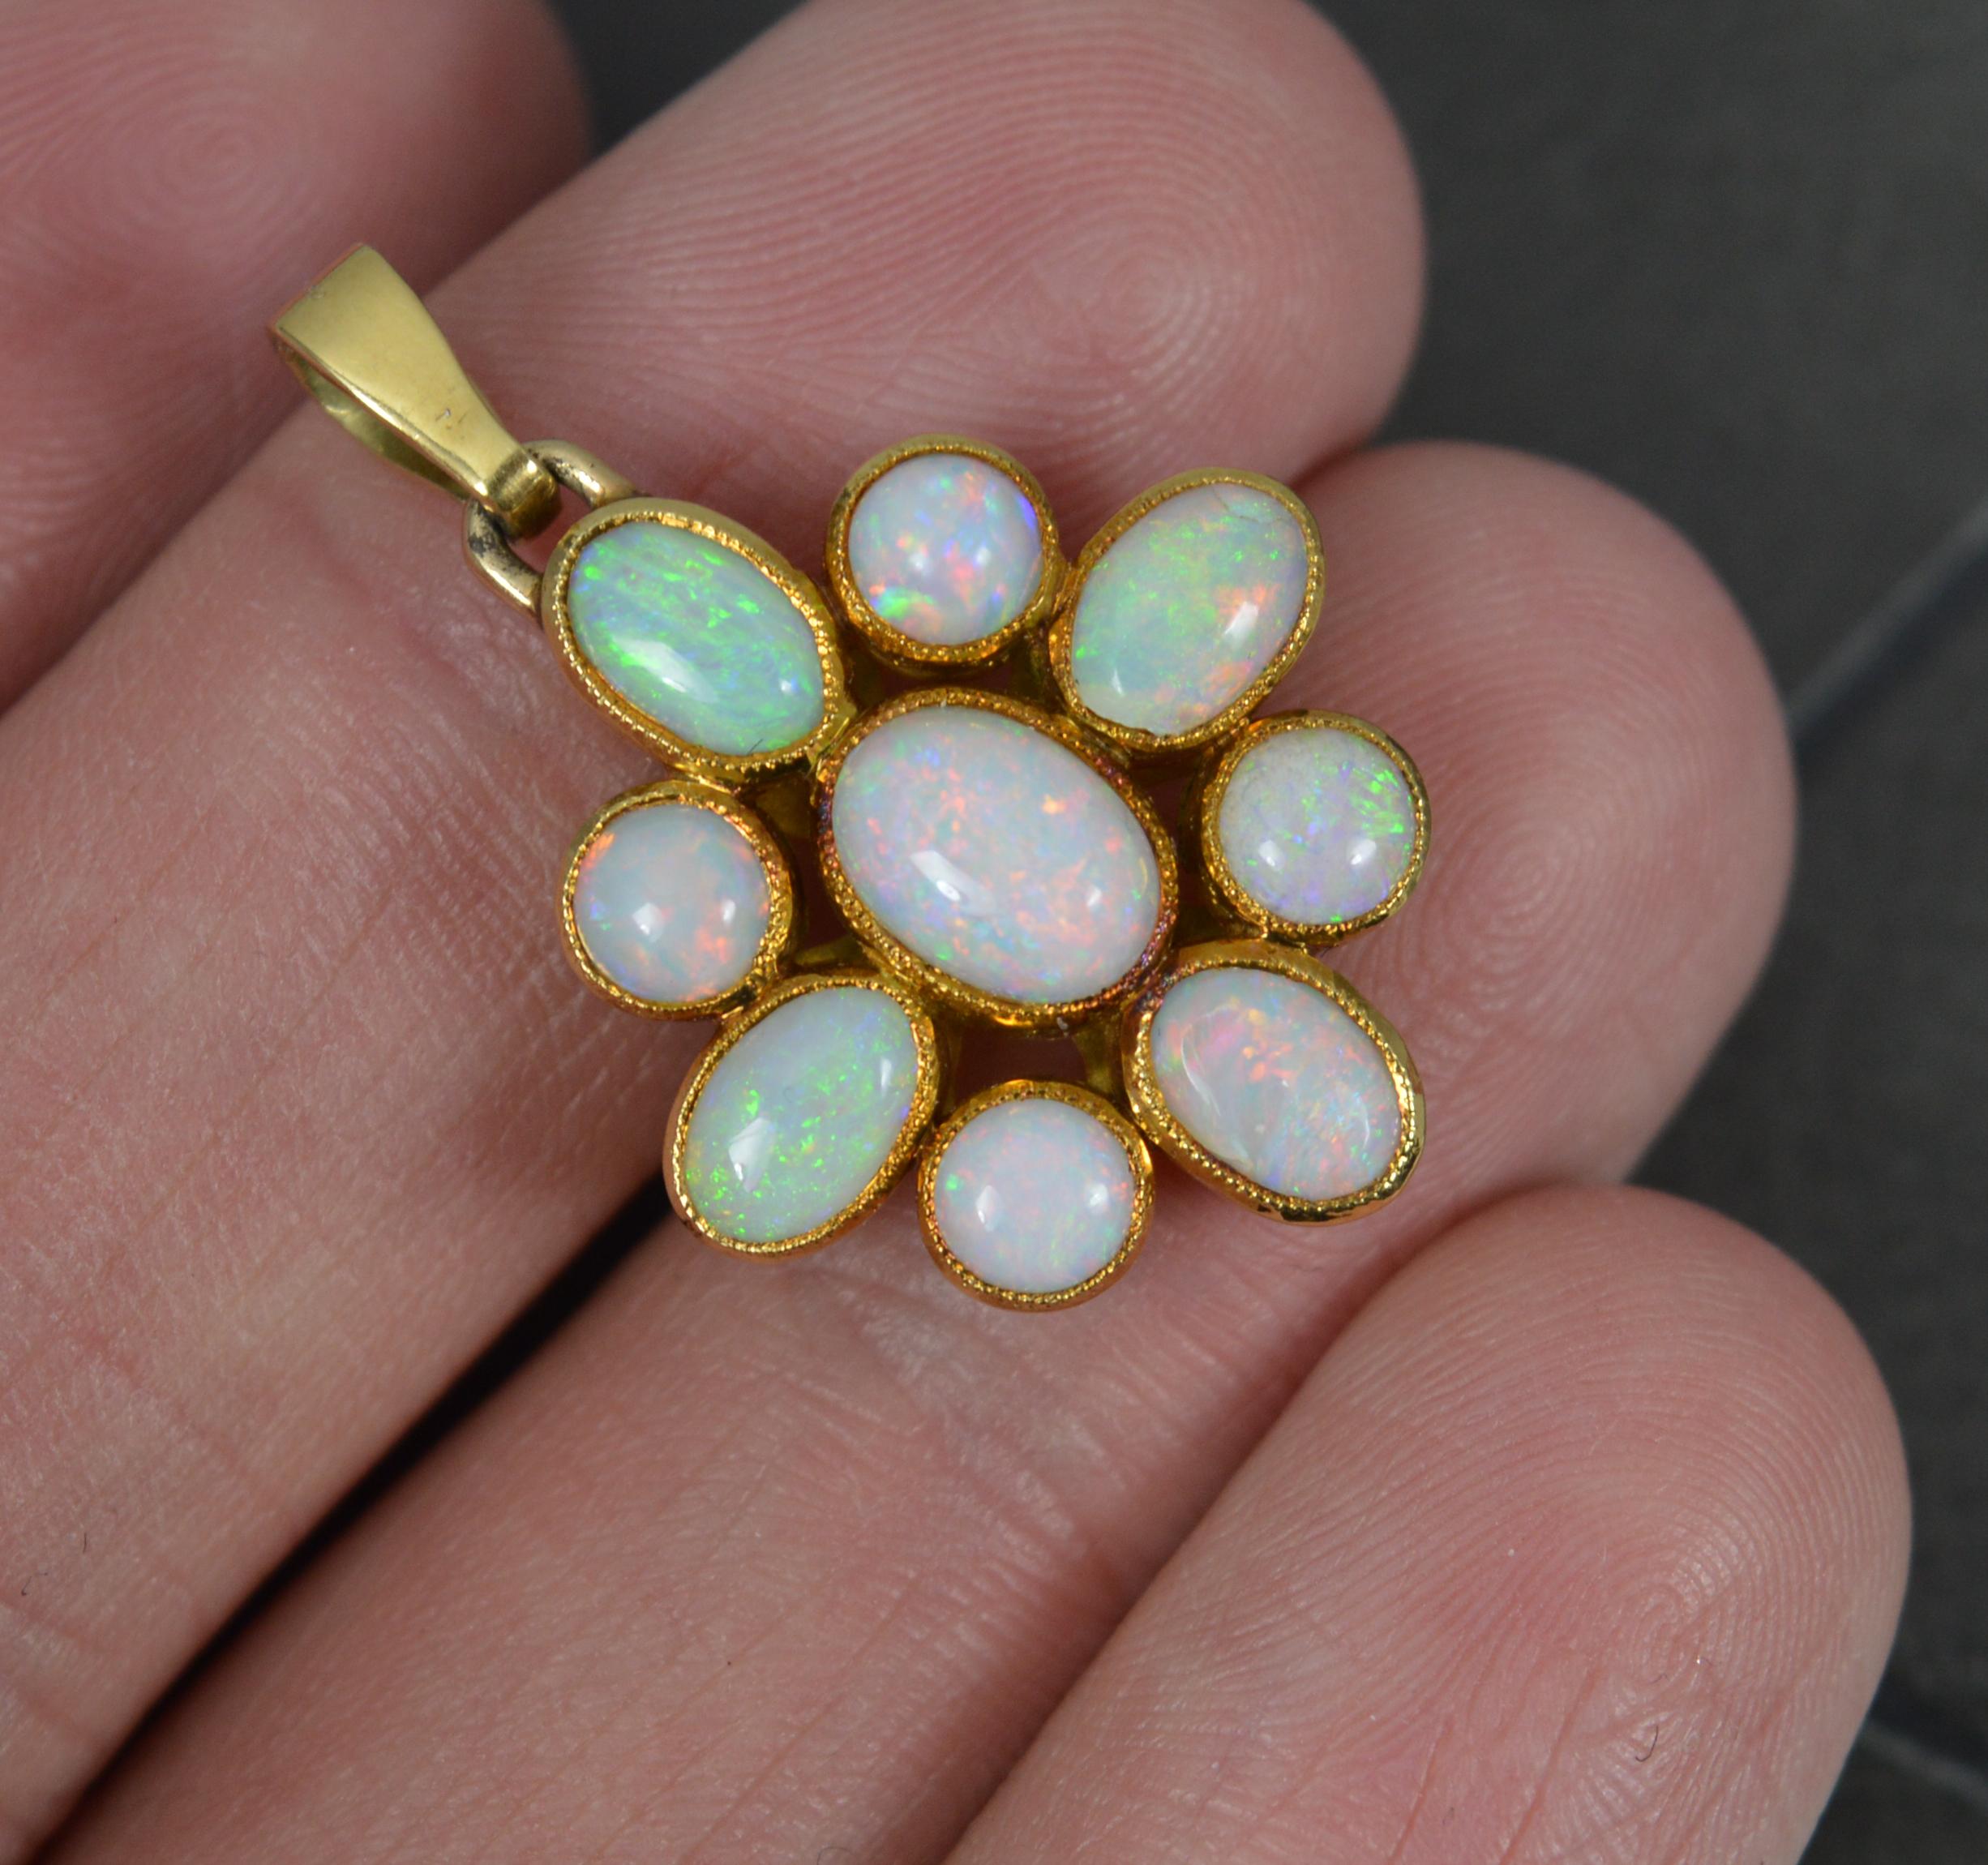 A superb statement pendant.
Solid 14 carat gold example.
Designed with many oval and round shaped natural opals. Full of colour. Finely set into grain bezel settings.

CONDITION ; Excellent. Beautiful example. Polished. Well set stones. Once small